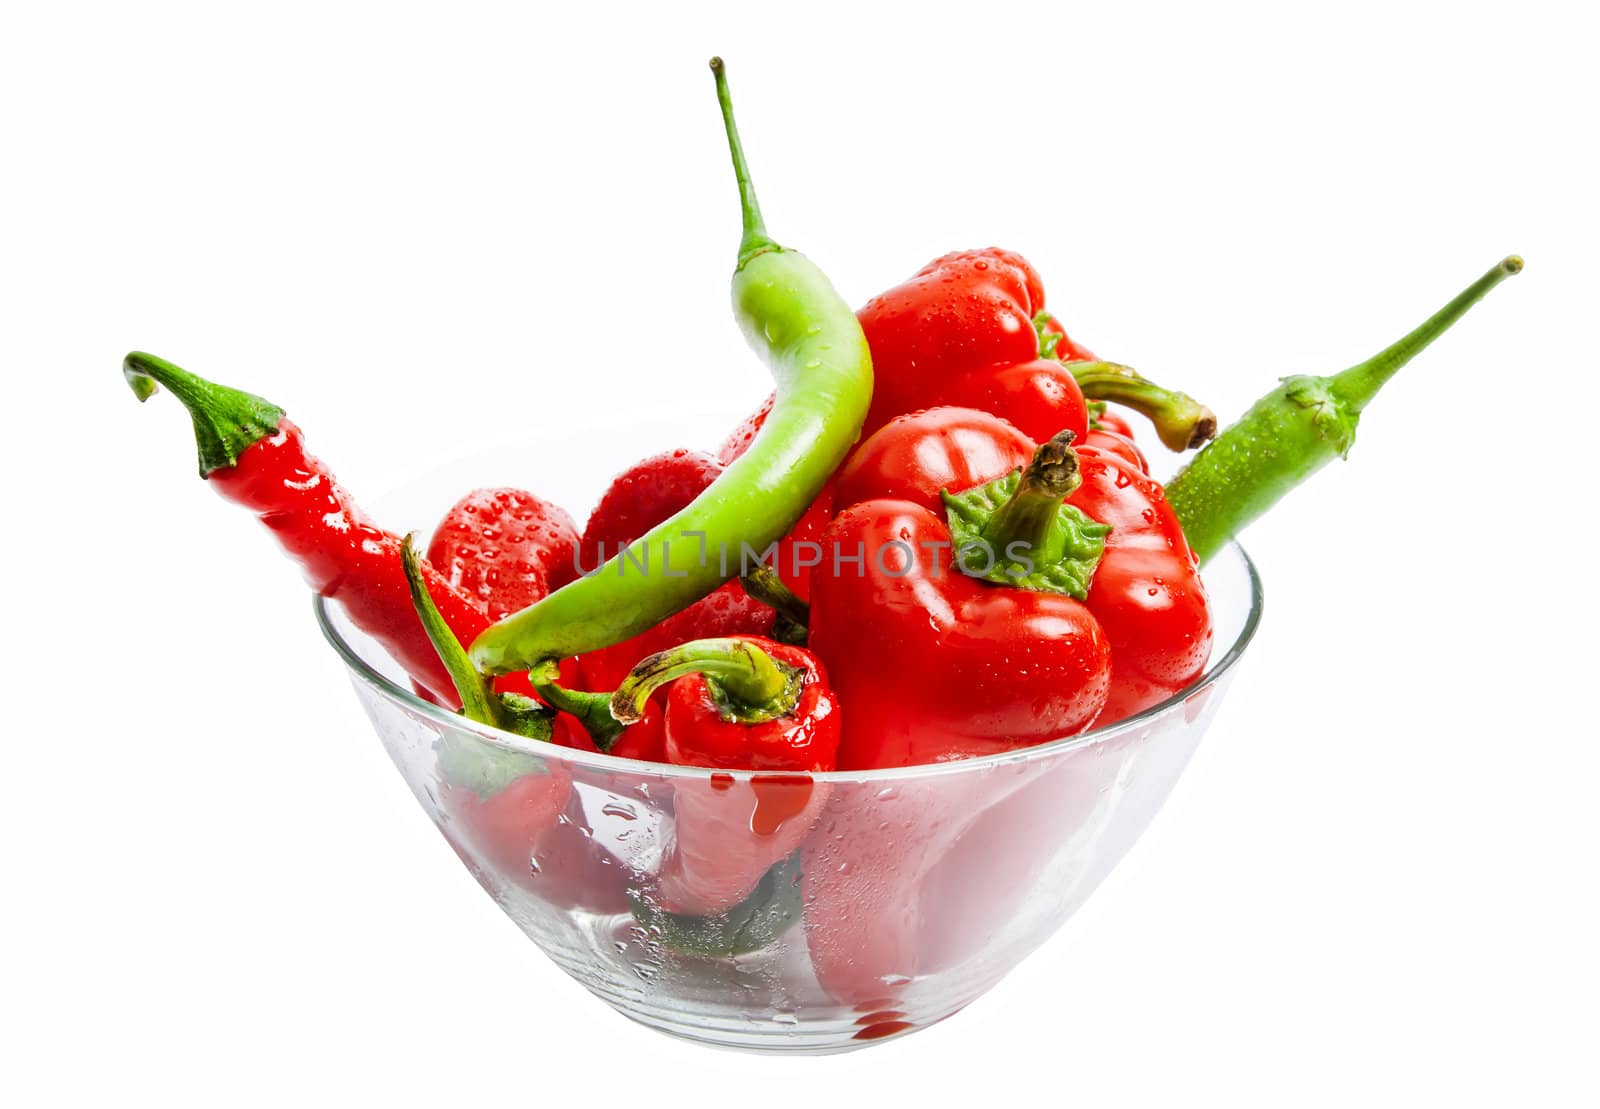 Red and green chili and bulgarian pepper in glass dish isolated on white